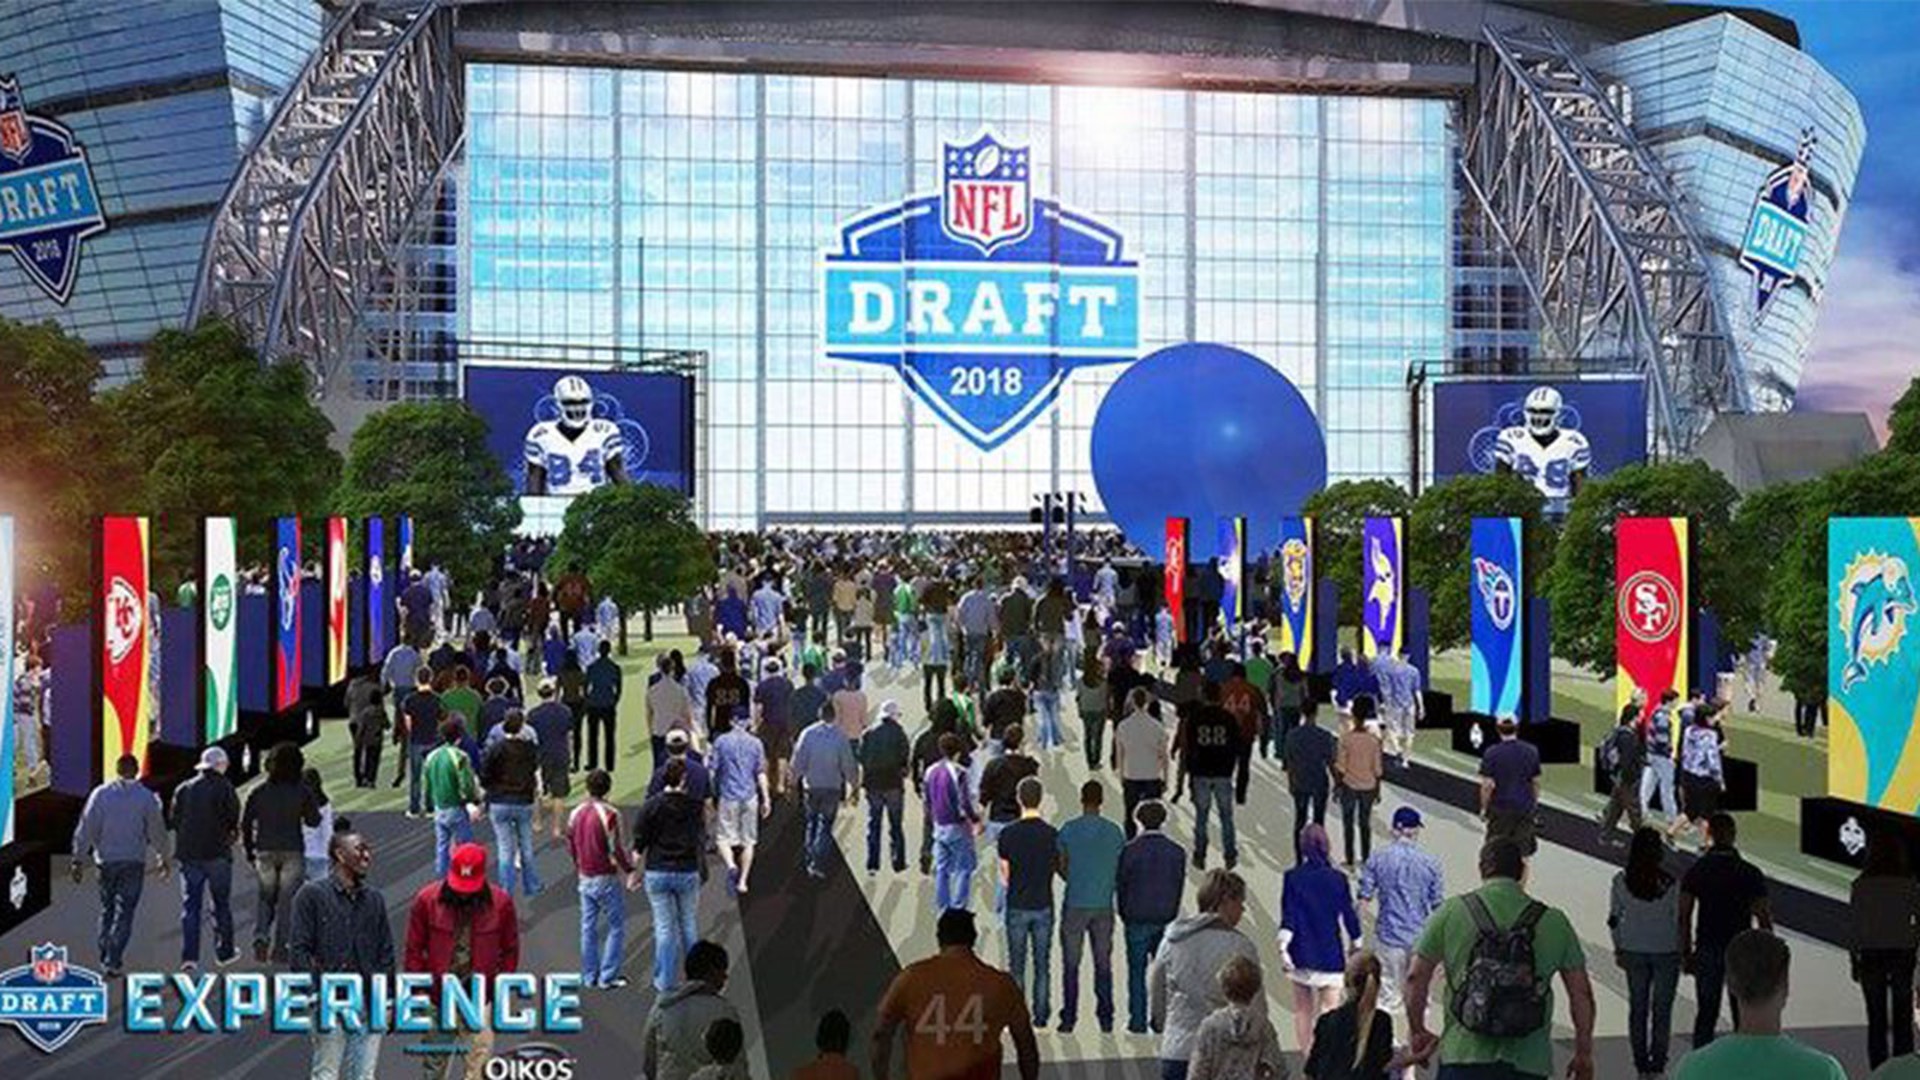 The 2018 NFL Draft is coming to AT&T Stadium in Arlington.